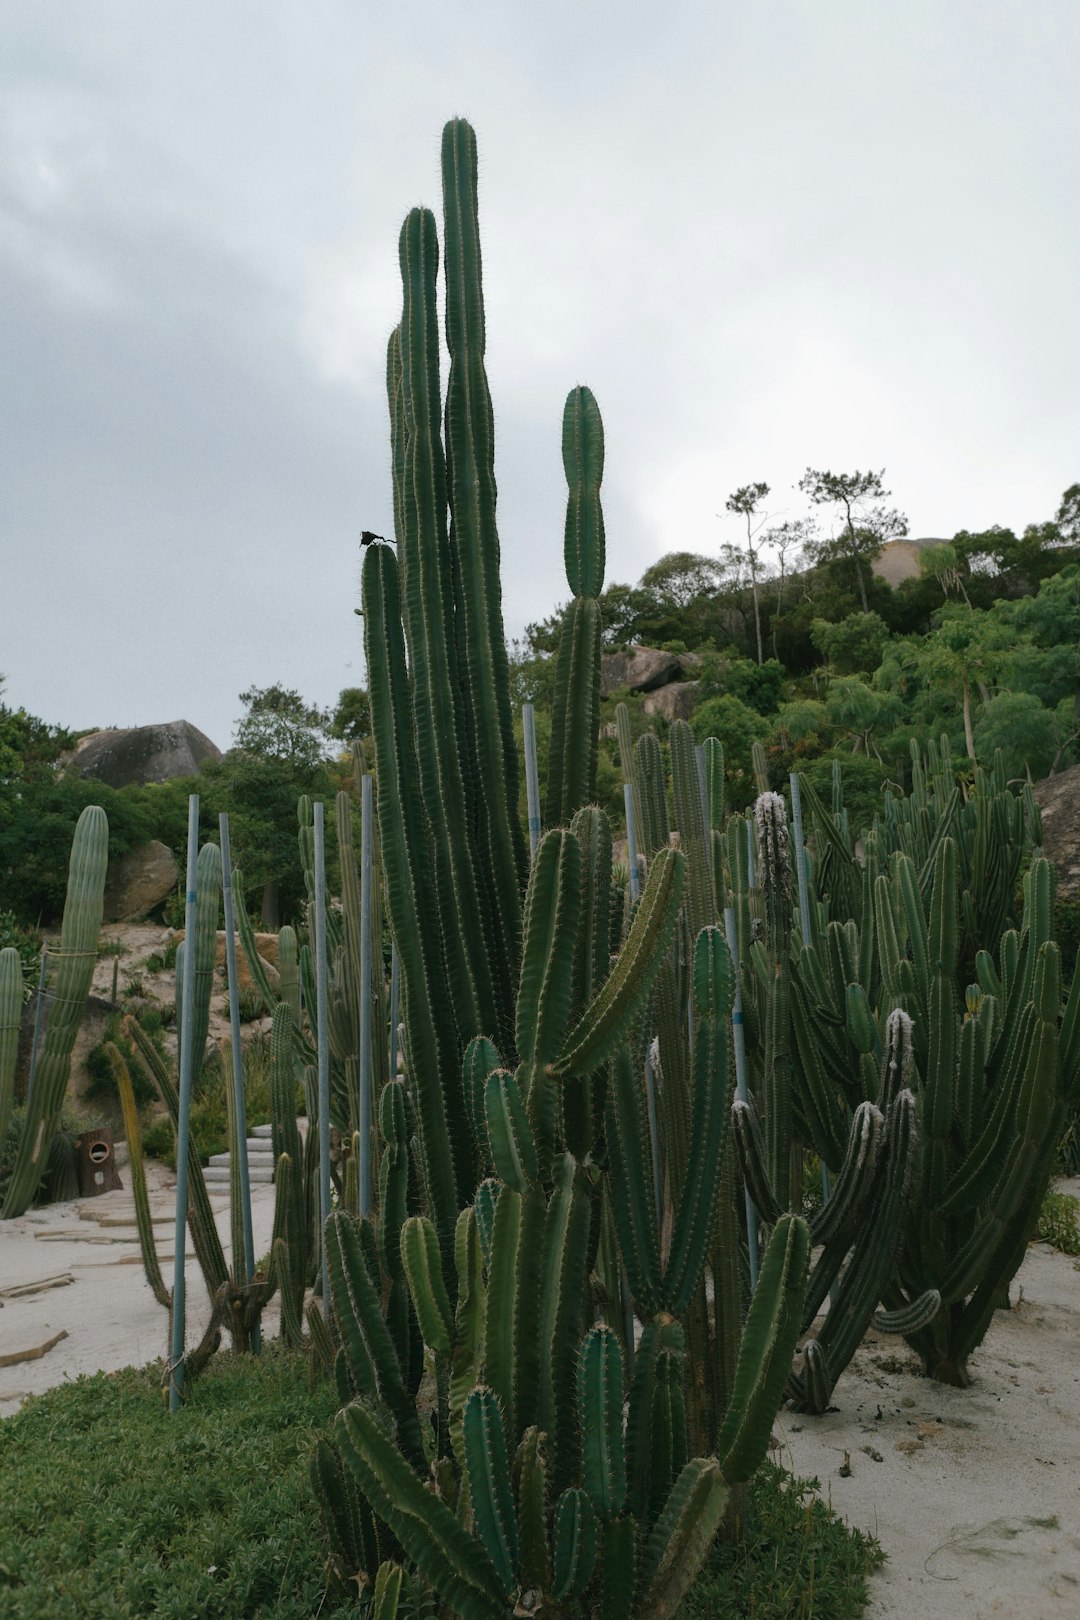 green cactus plants on brown soil during daytime